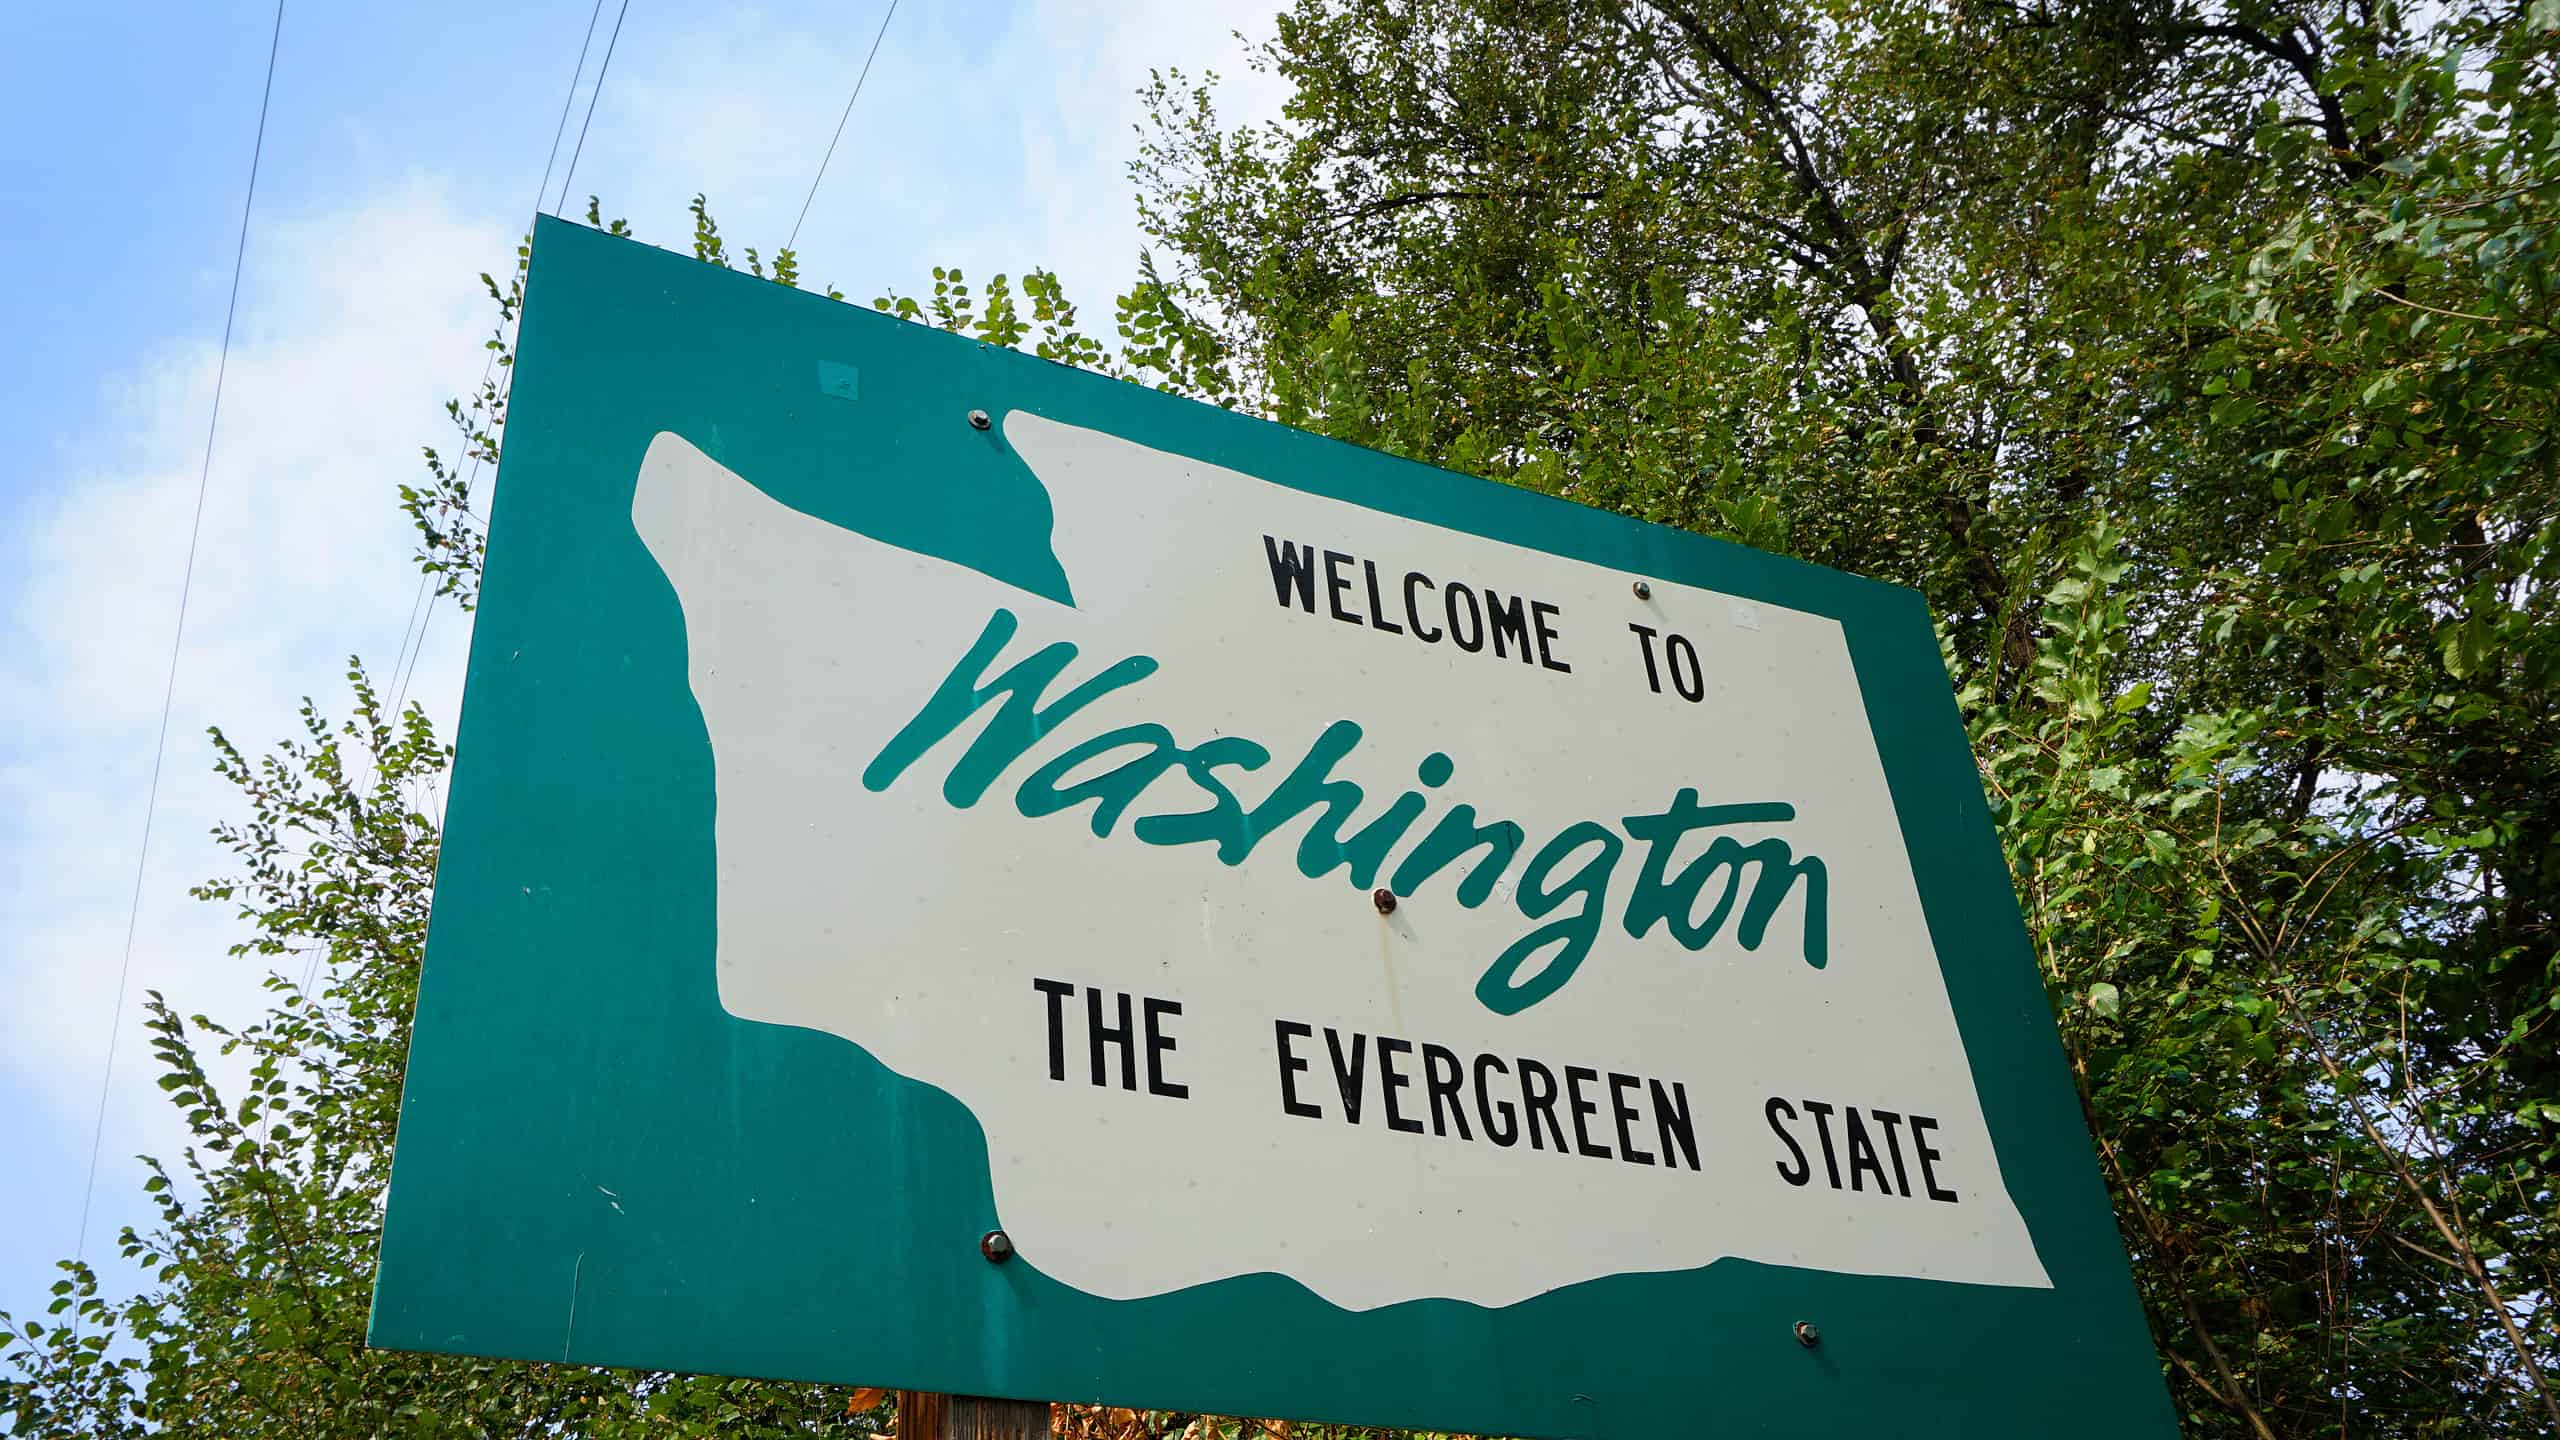 Welcome to Washington - state sign